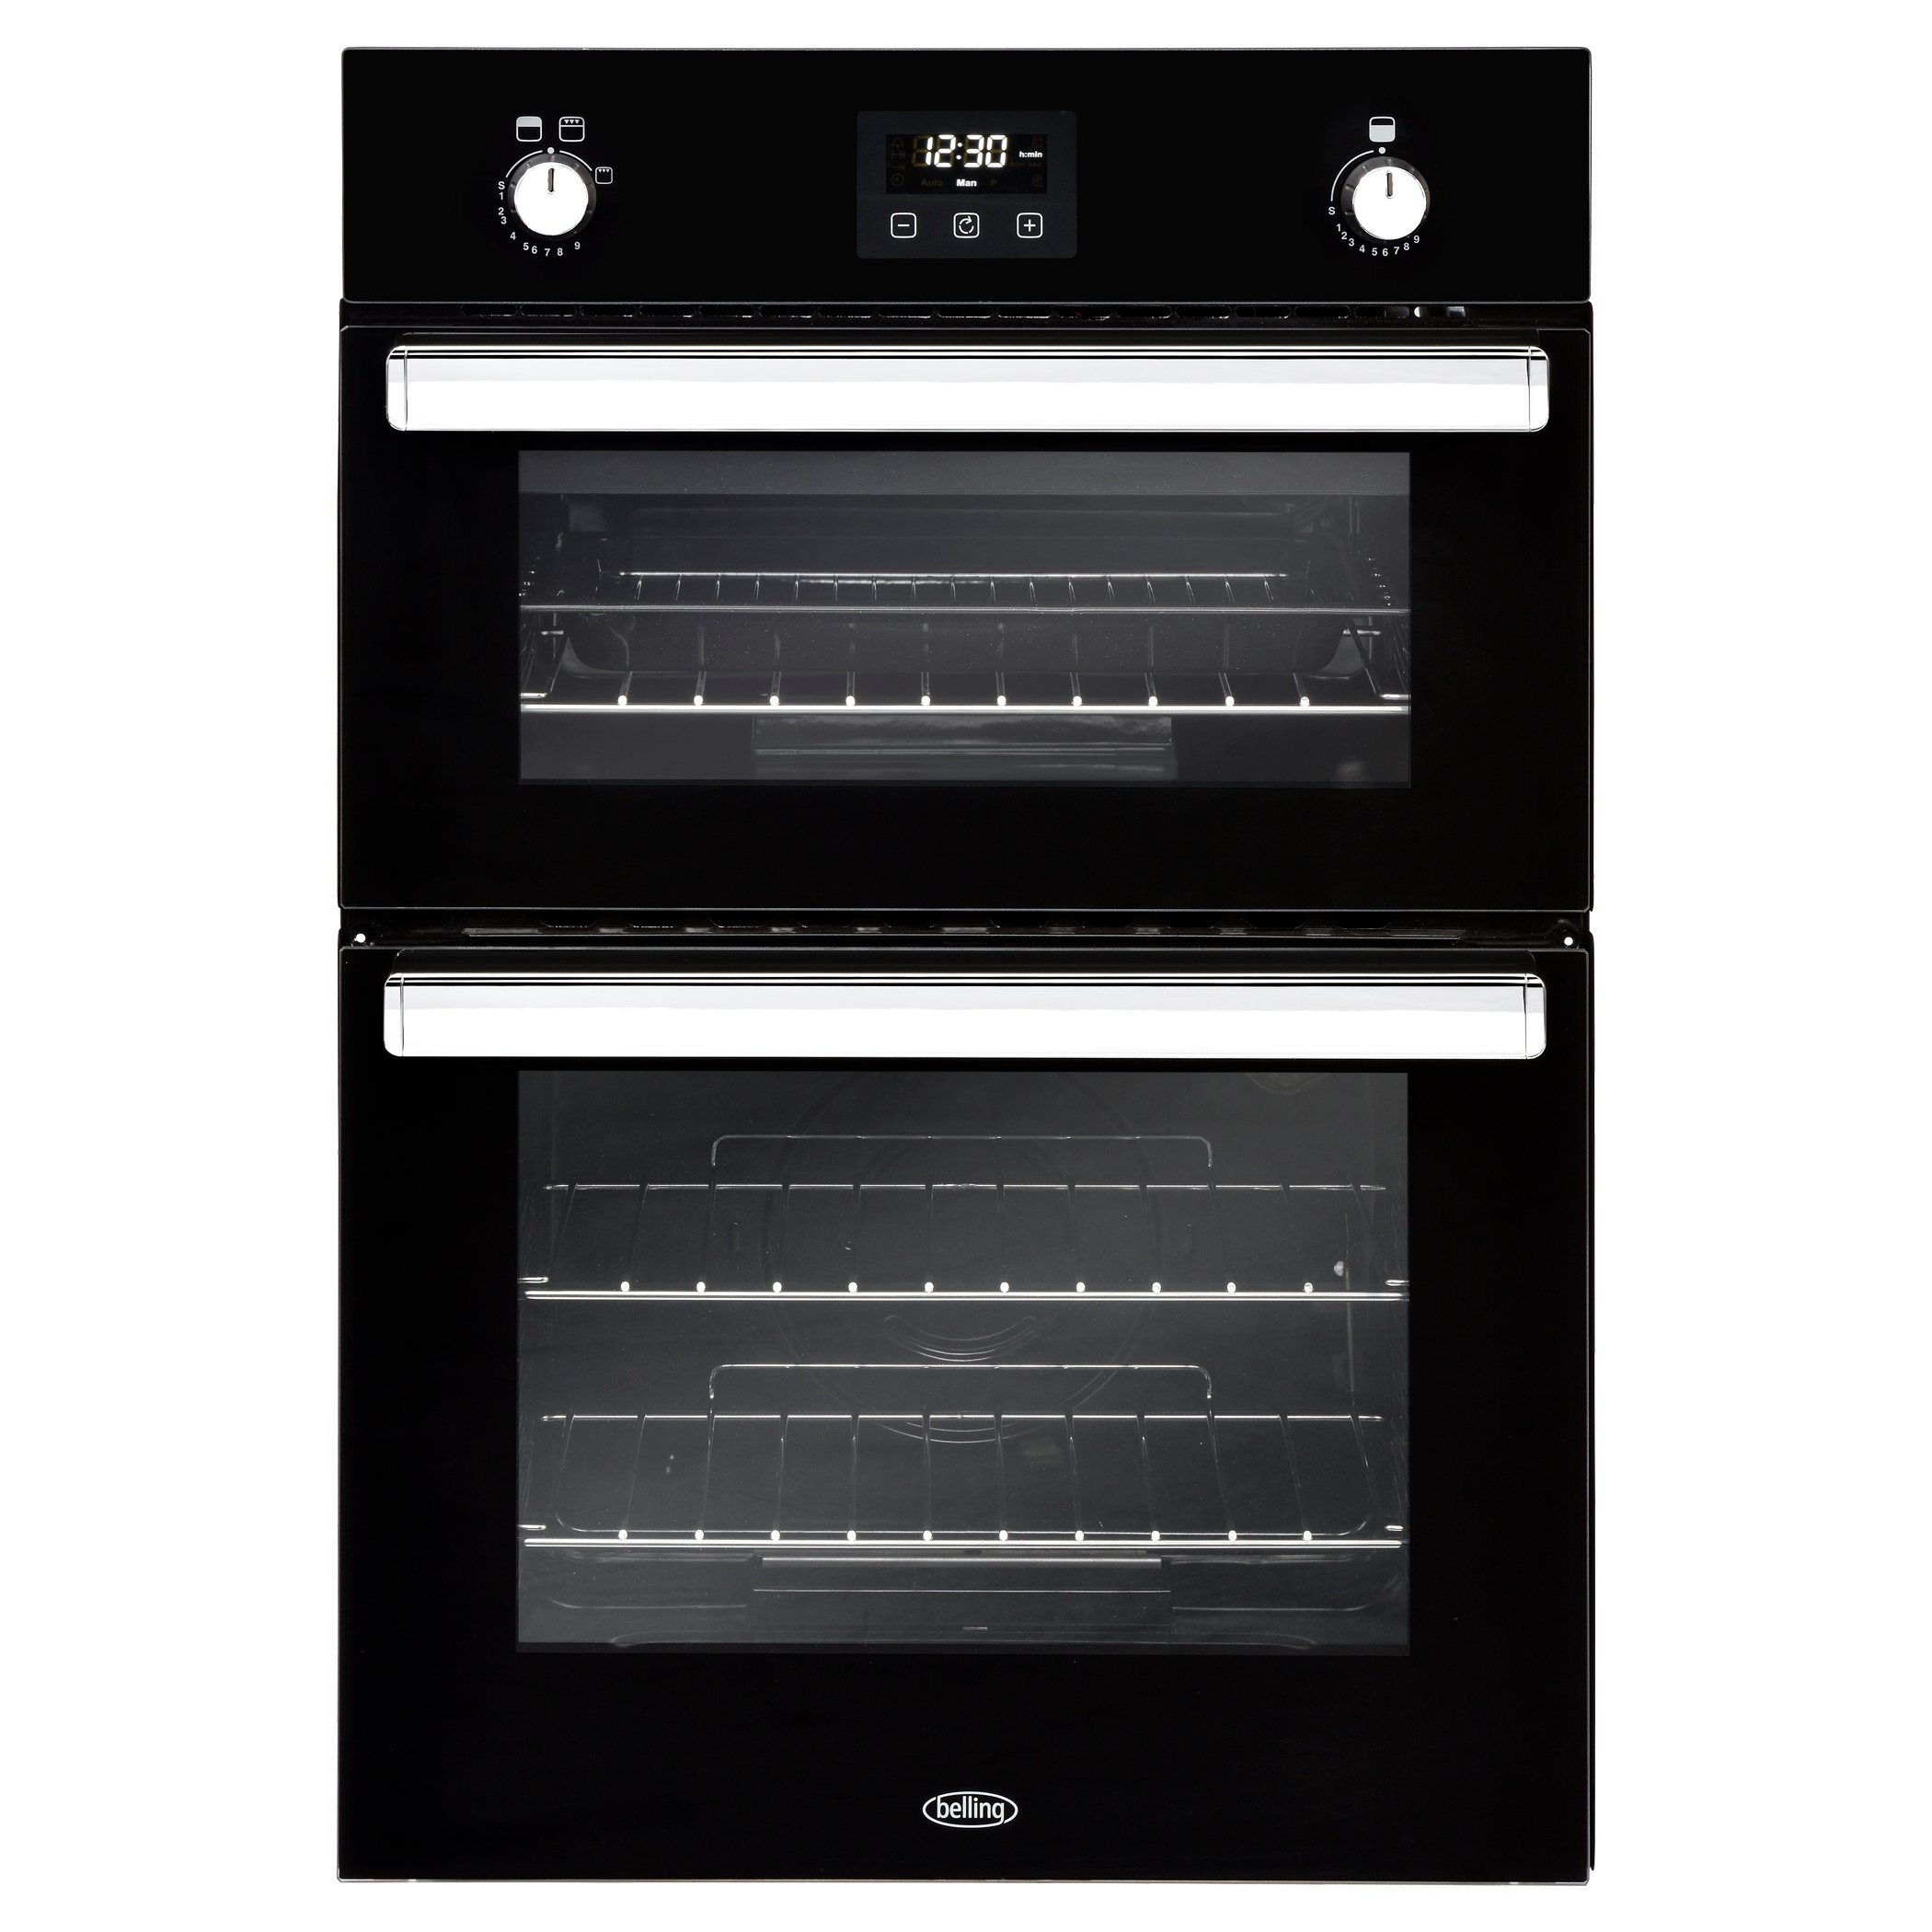 90cm double gas oven with 39L top oven and 69L gross main oven capacity and easy-clean enamel. Additional features include cook to off timer, fixed rate grill and slow cook. A energy rating.